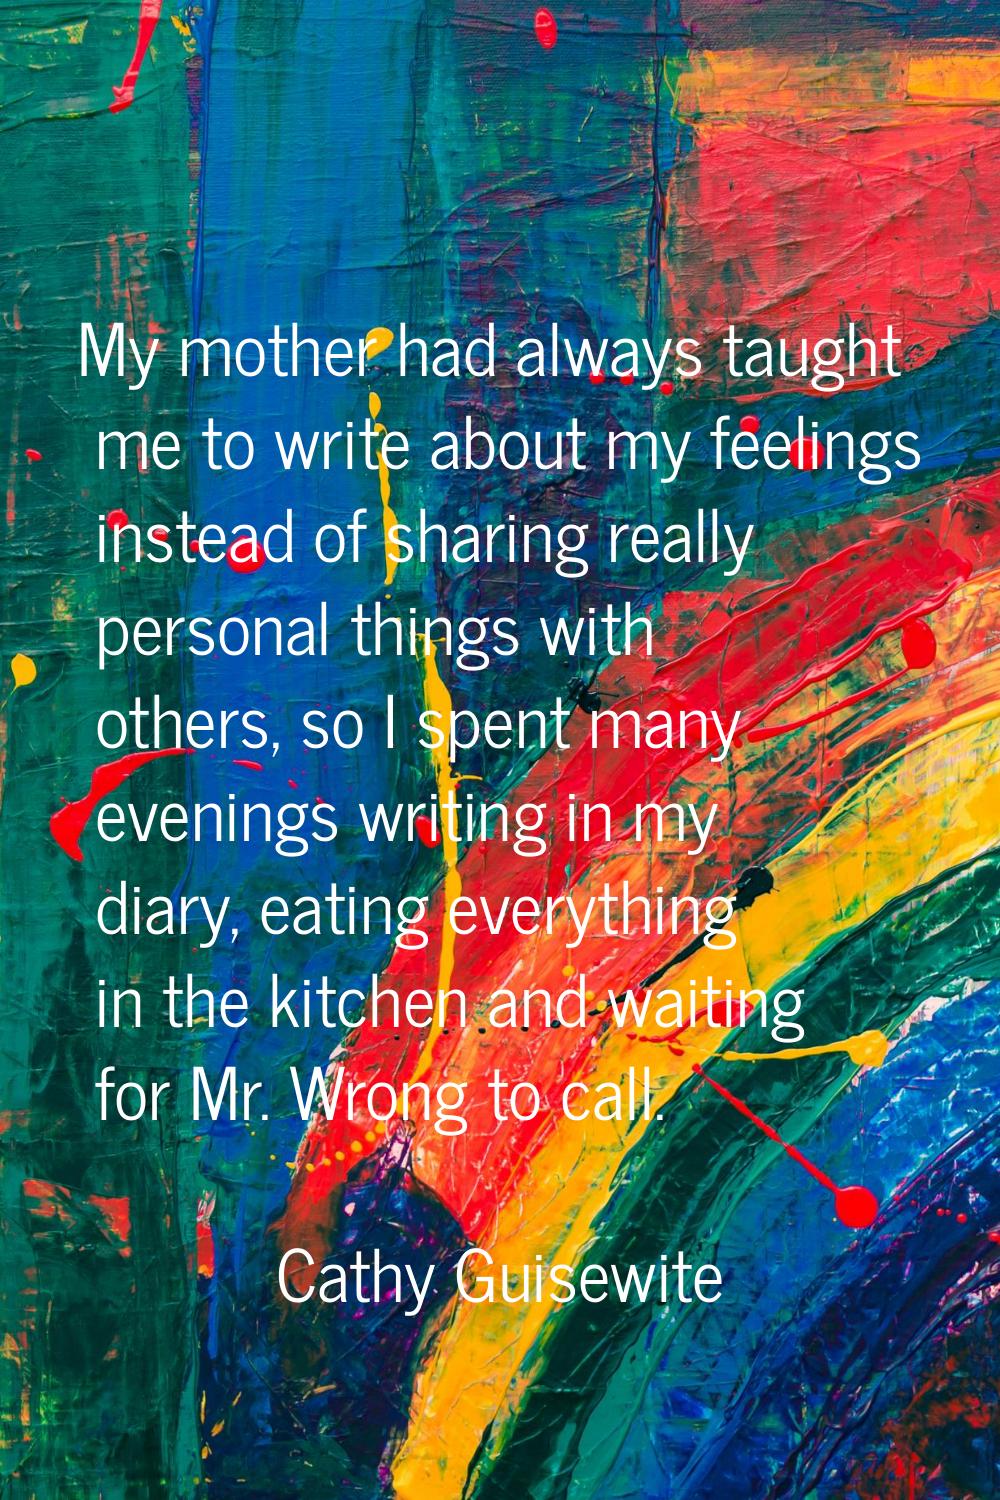 My mother had always taught me to write about my feelings instead of sharing really personal things